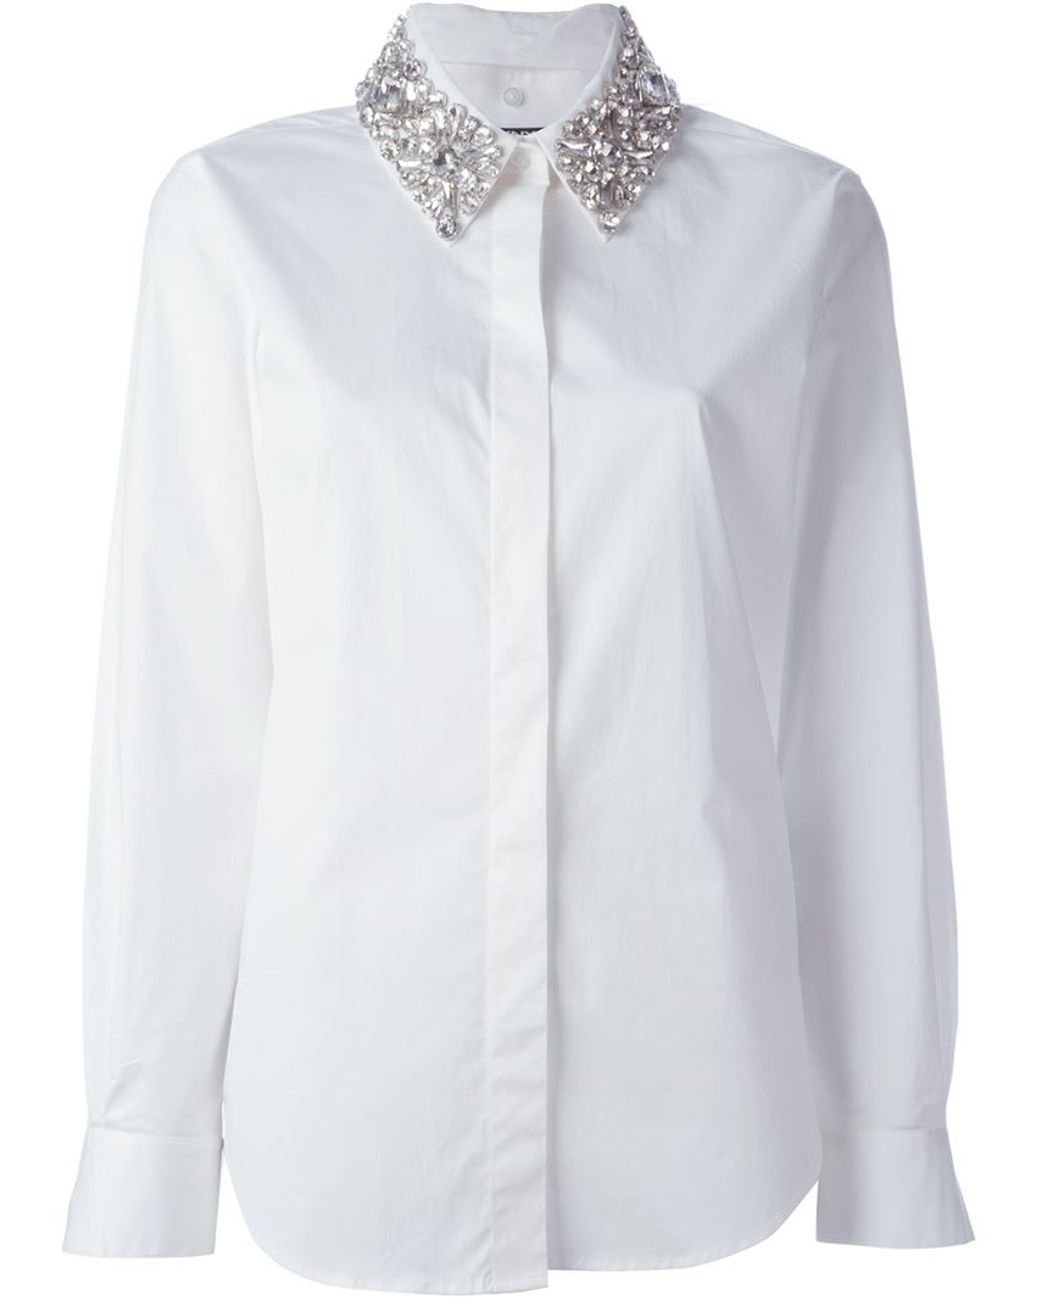 DKNY Embellished Collar Shirt in White | Lyst